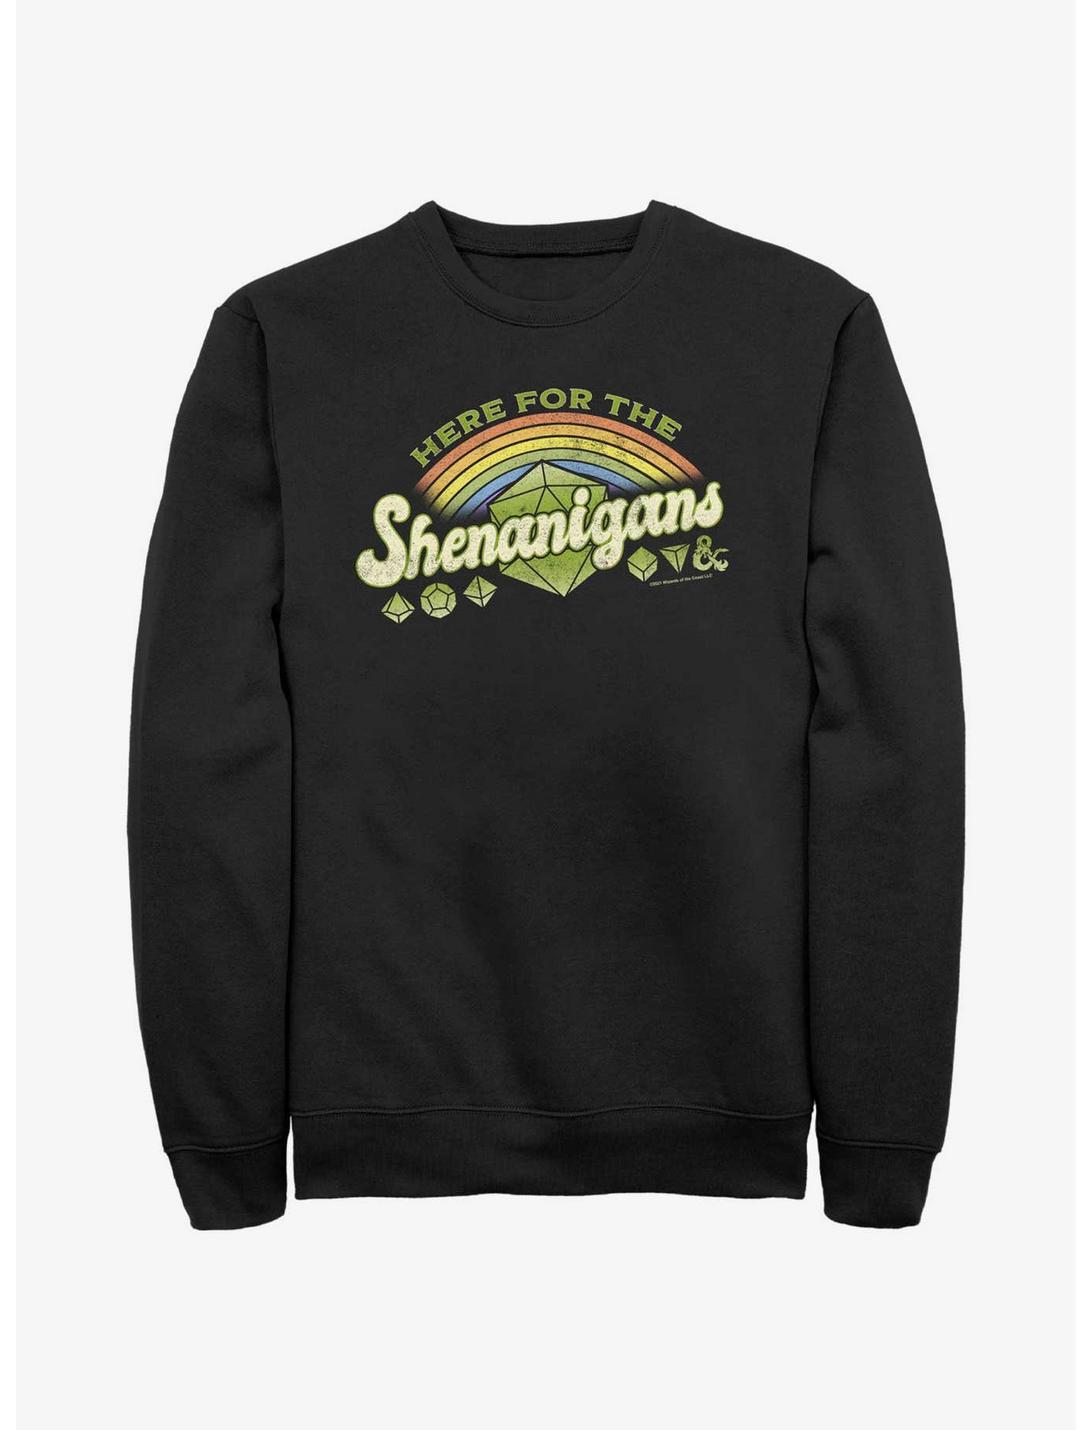 Dungeons And Dragons Here For Shenanigans Sweatshirt, BLACK, hi-res